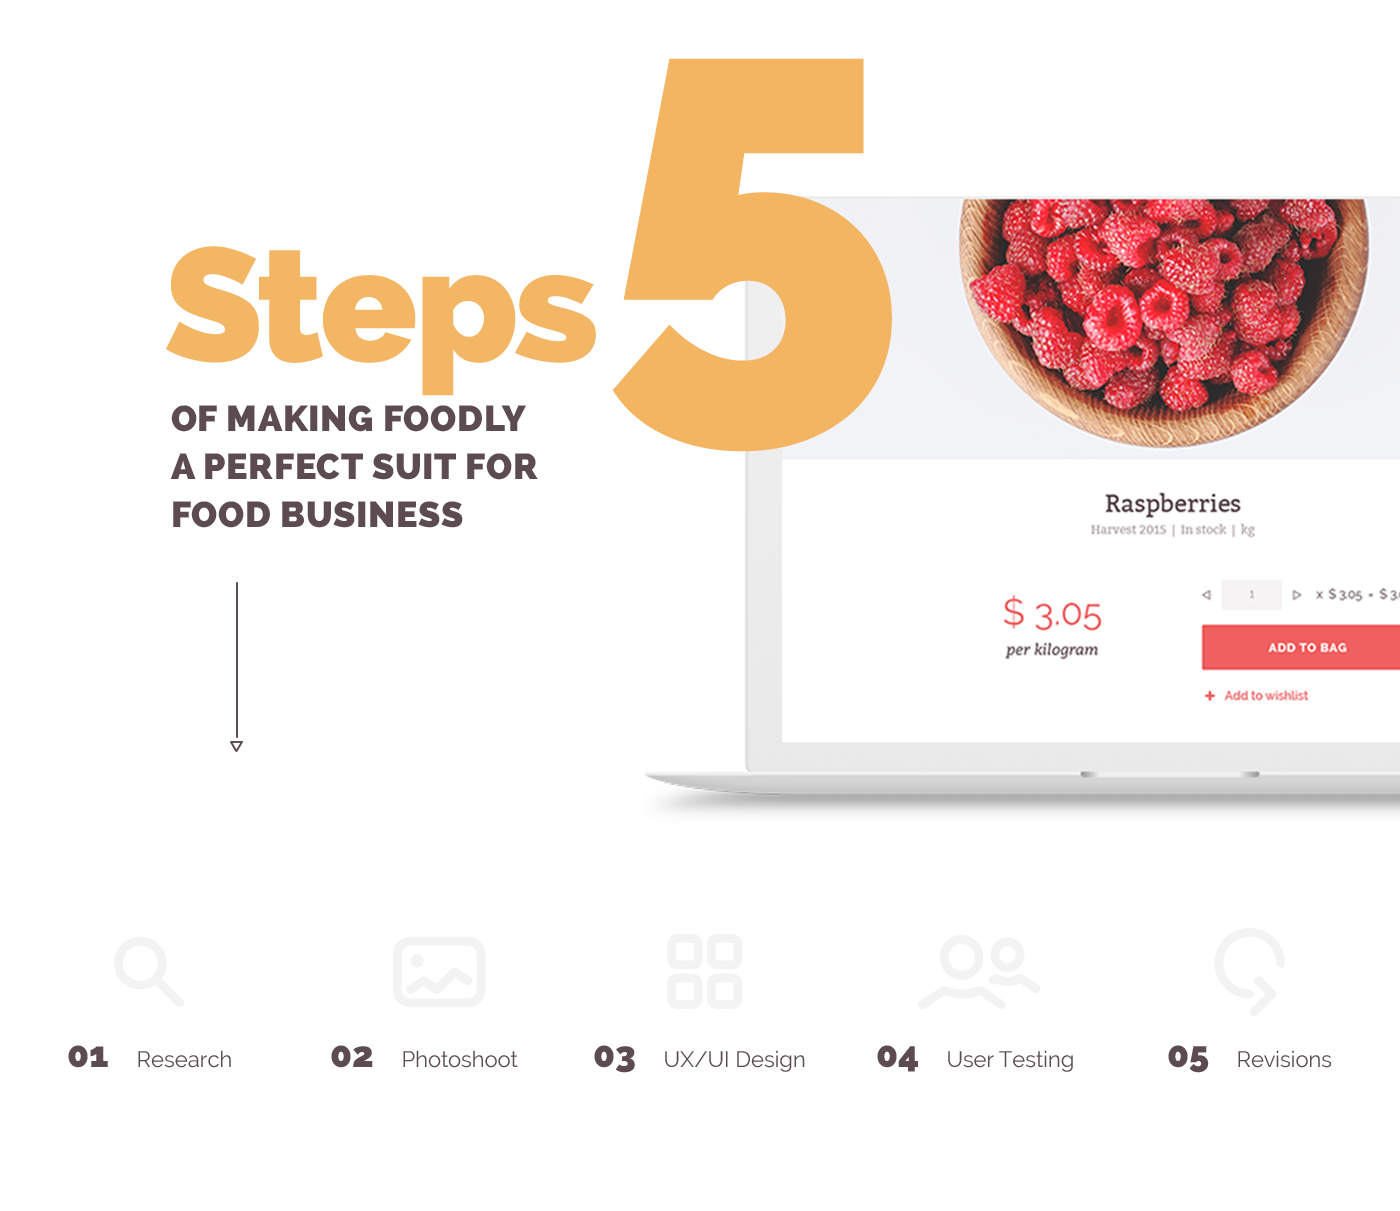 Shopify e-commerce store Online shop Grocery food store farm organic Local Producer food business